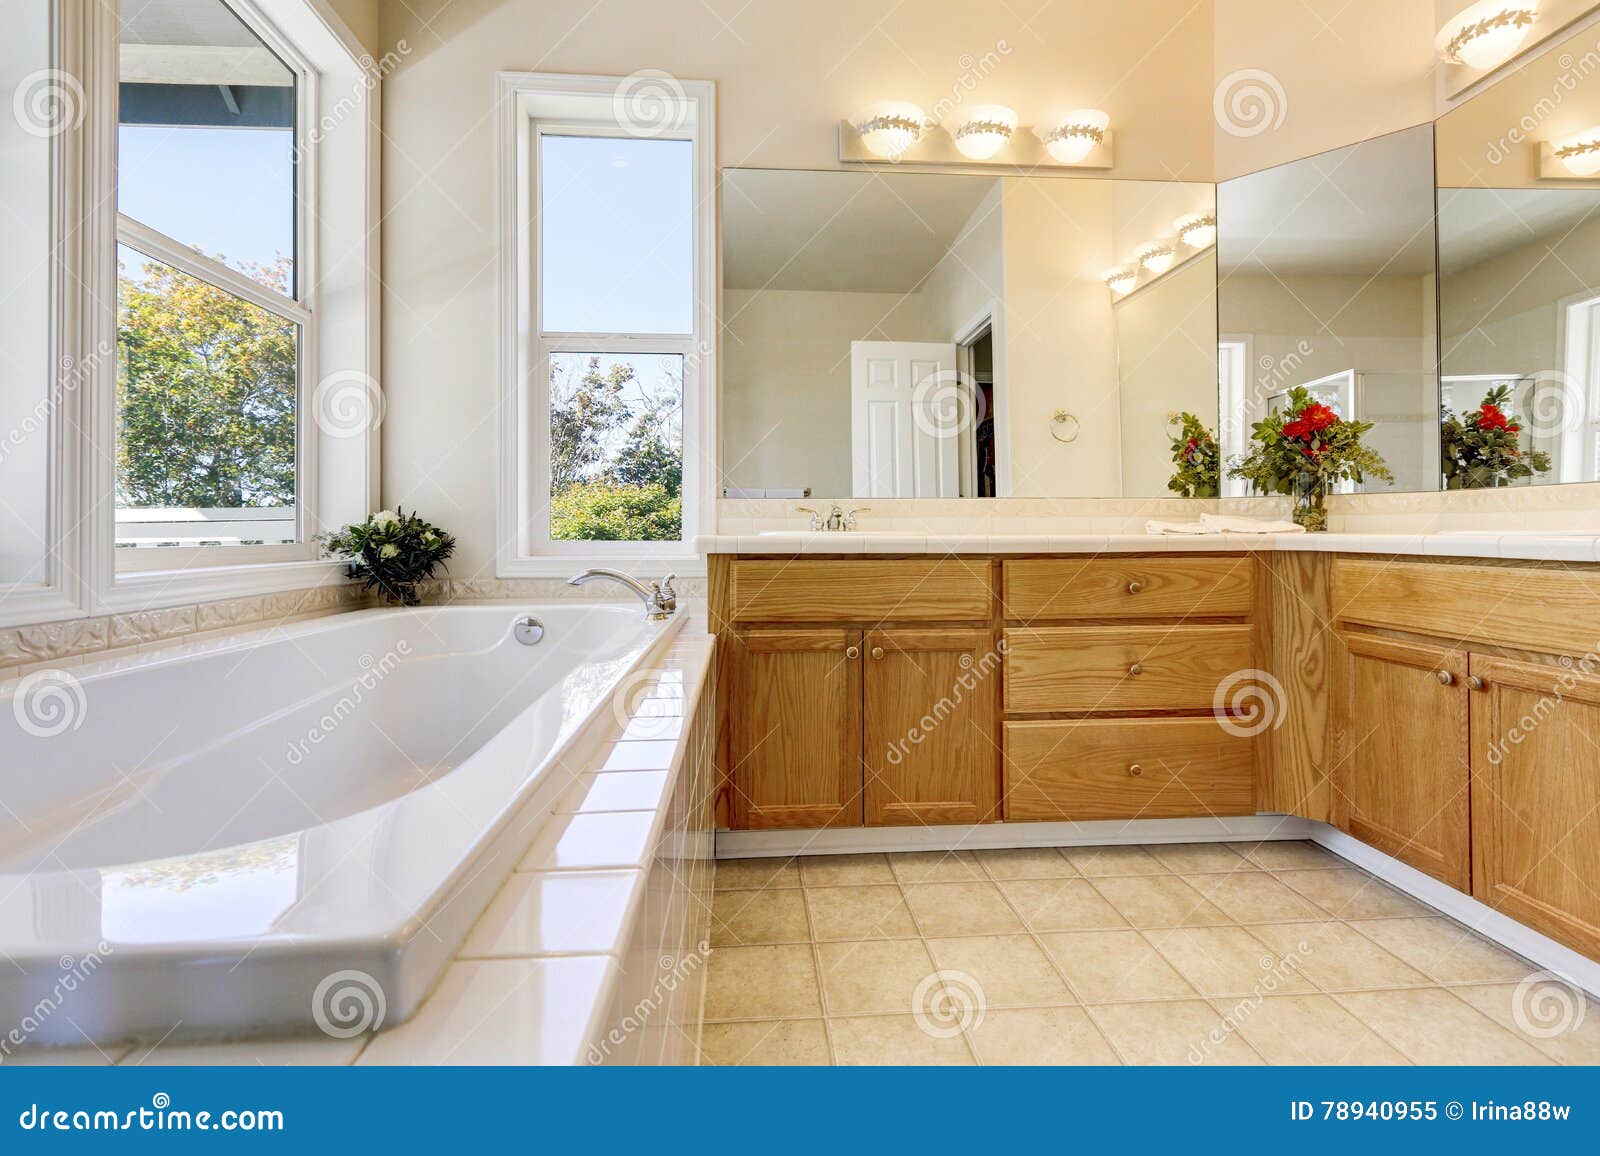 Luxury Bathroom Interior With Wooden Cabinets And White Bathtub